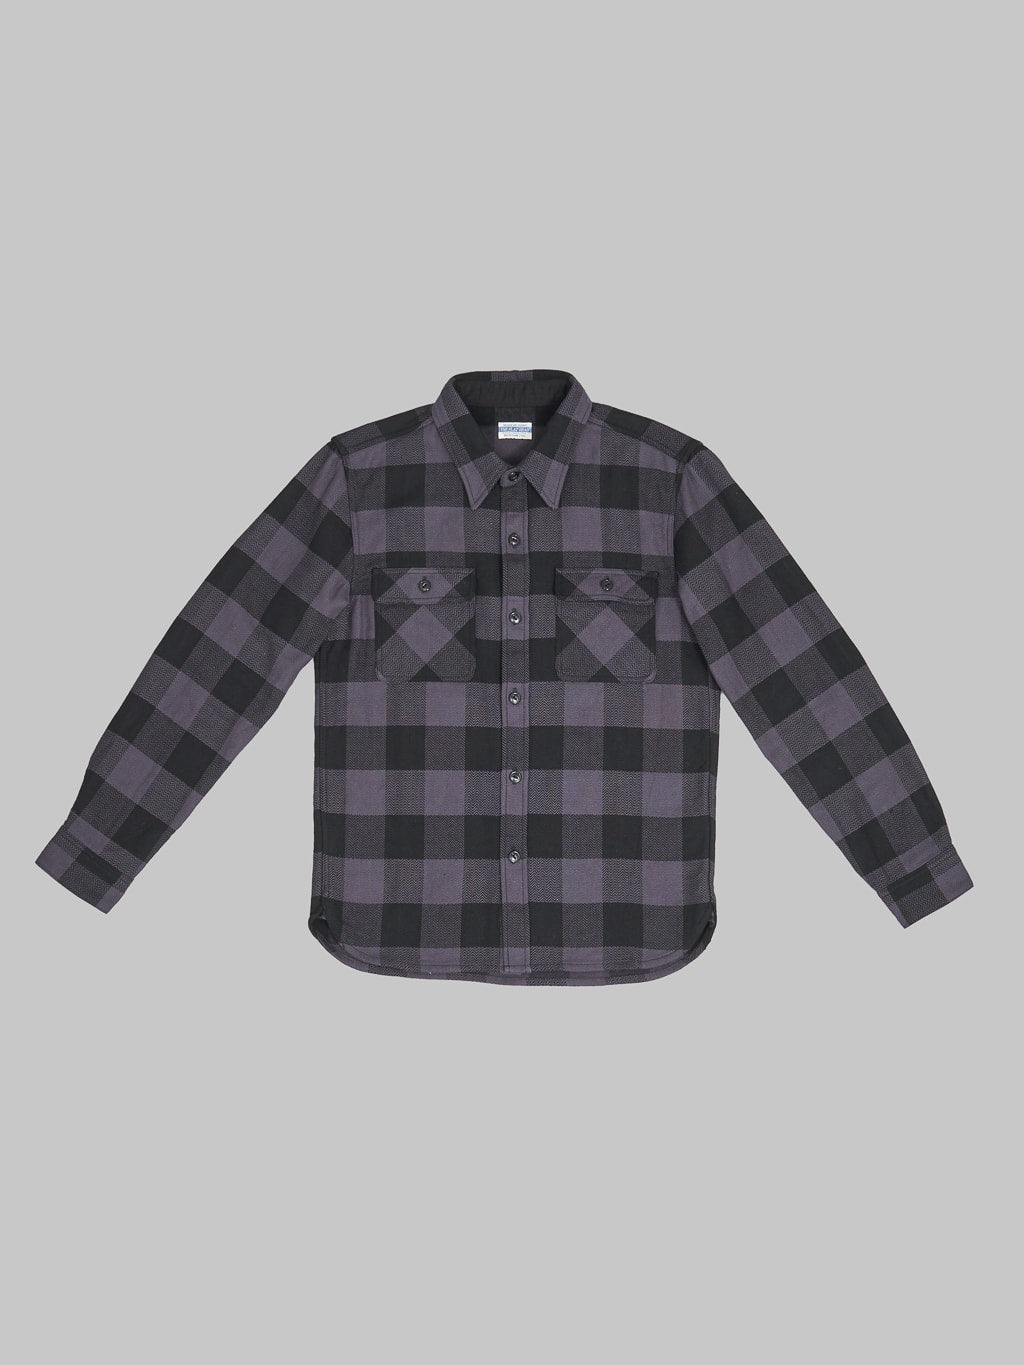 The Flat Head Block Check Flannel Shirt Grey front view